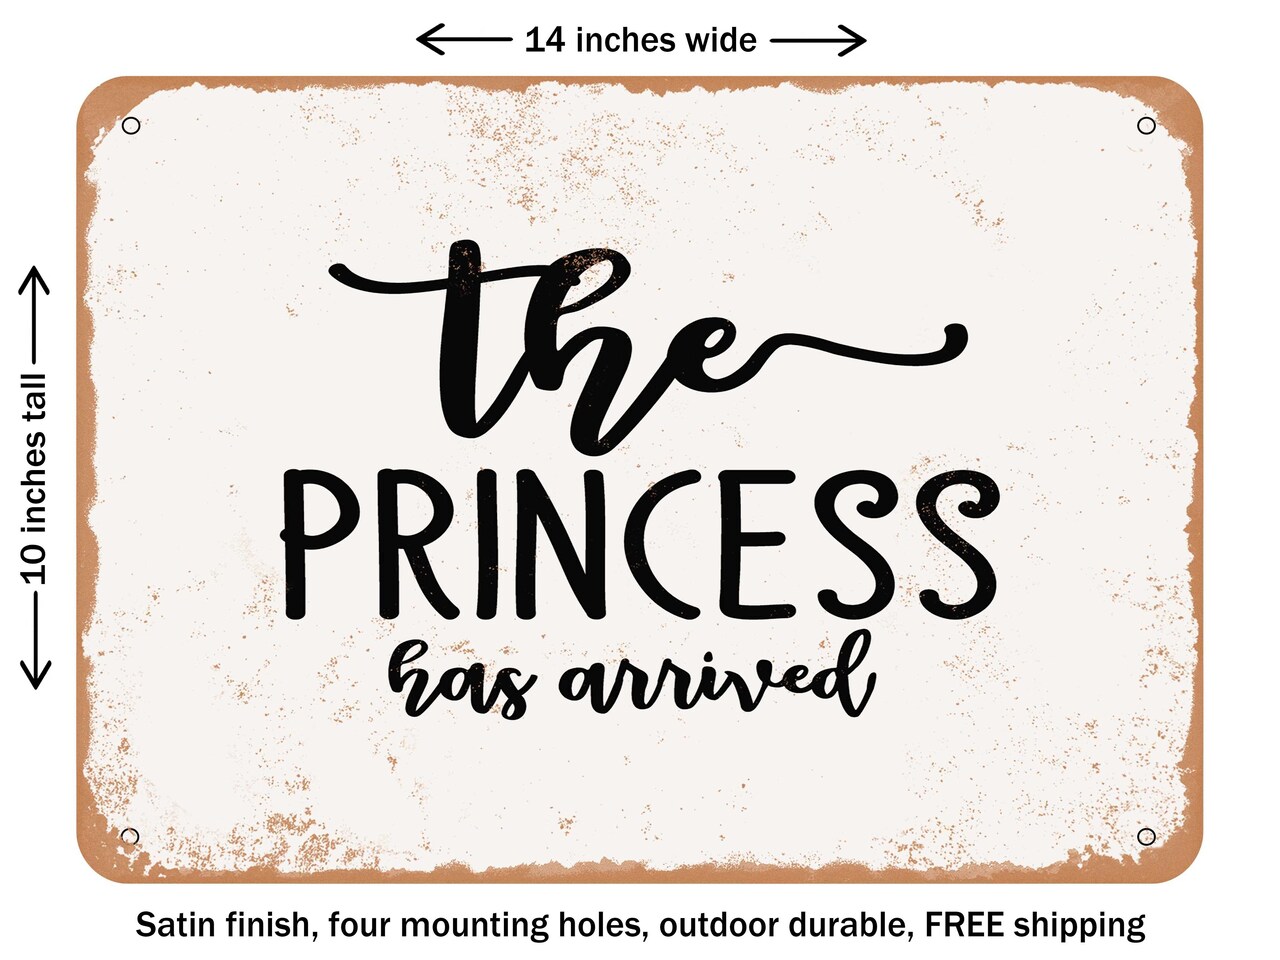 DECORATIVE METAL SIGN - the Princess Has Arrived - 2 - Vintage Rusty Look